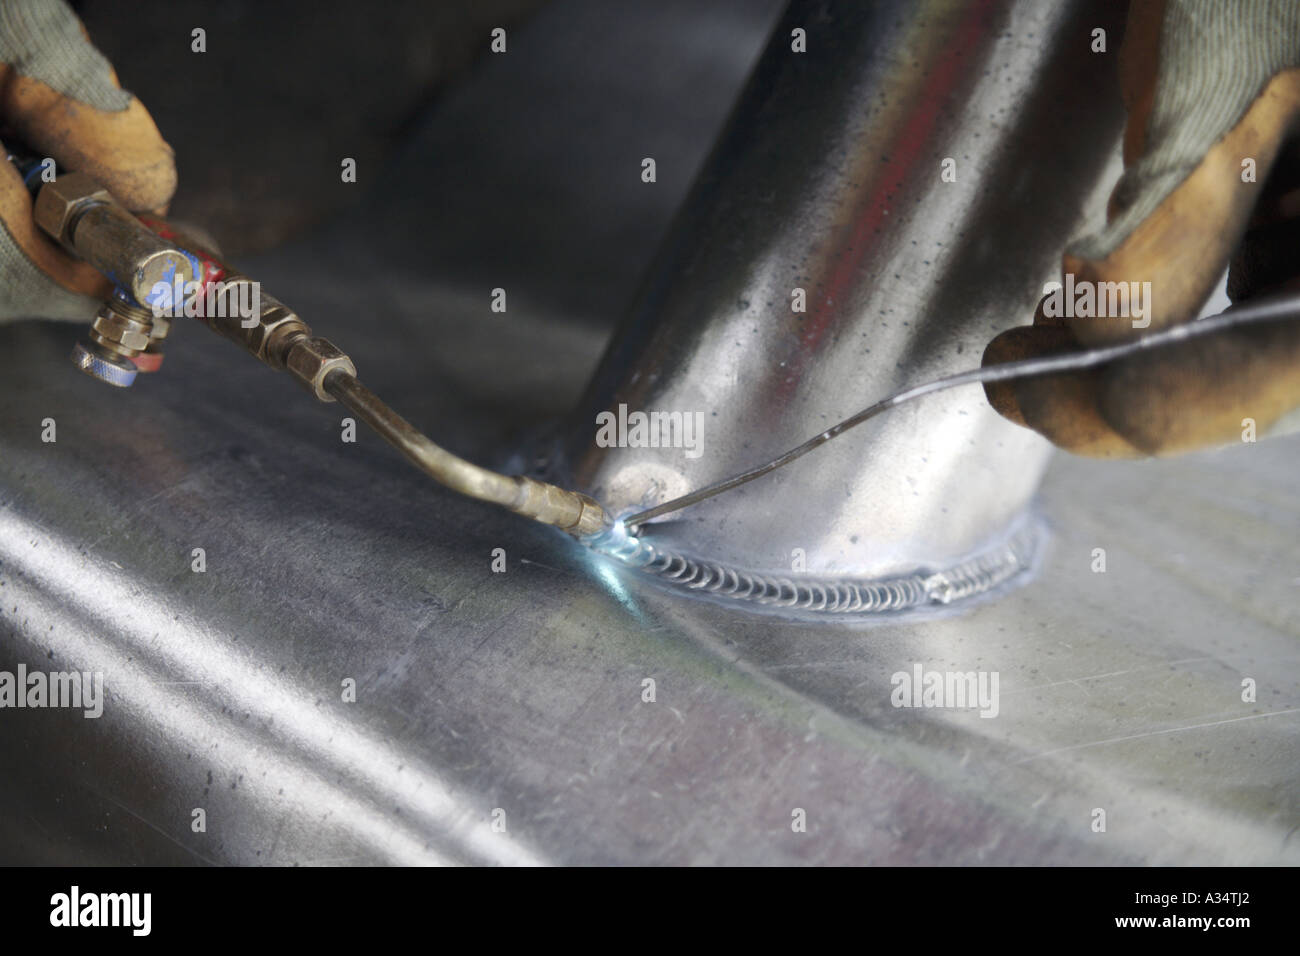 Skilled lead worker burns or welds a joint on a lead pipe collar Stock Photo